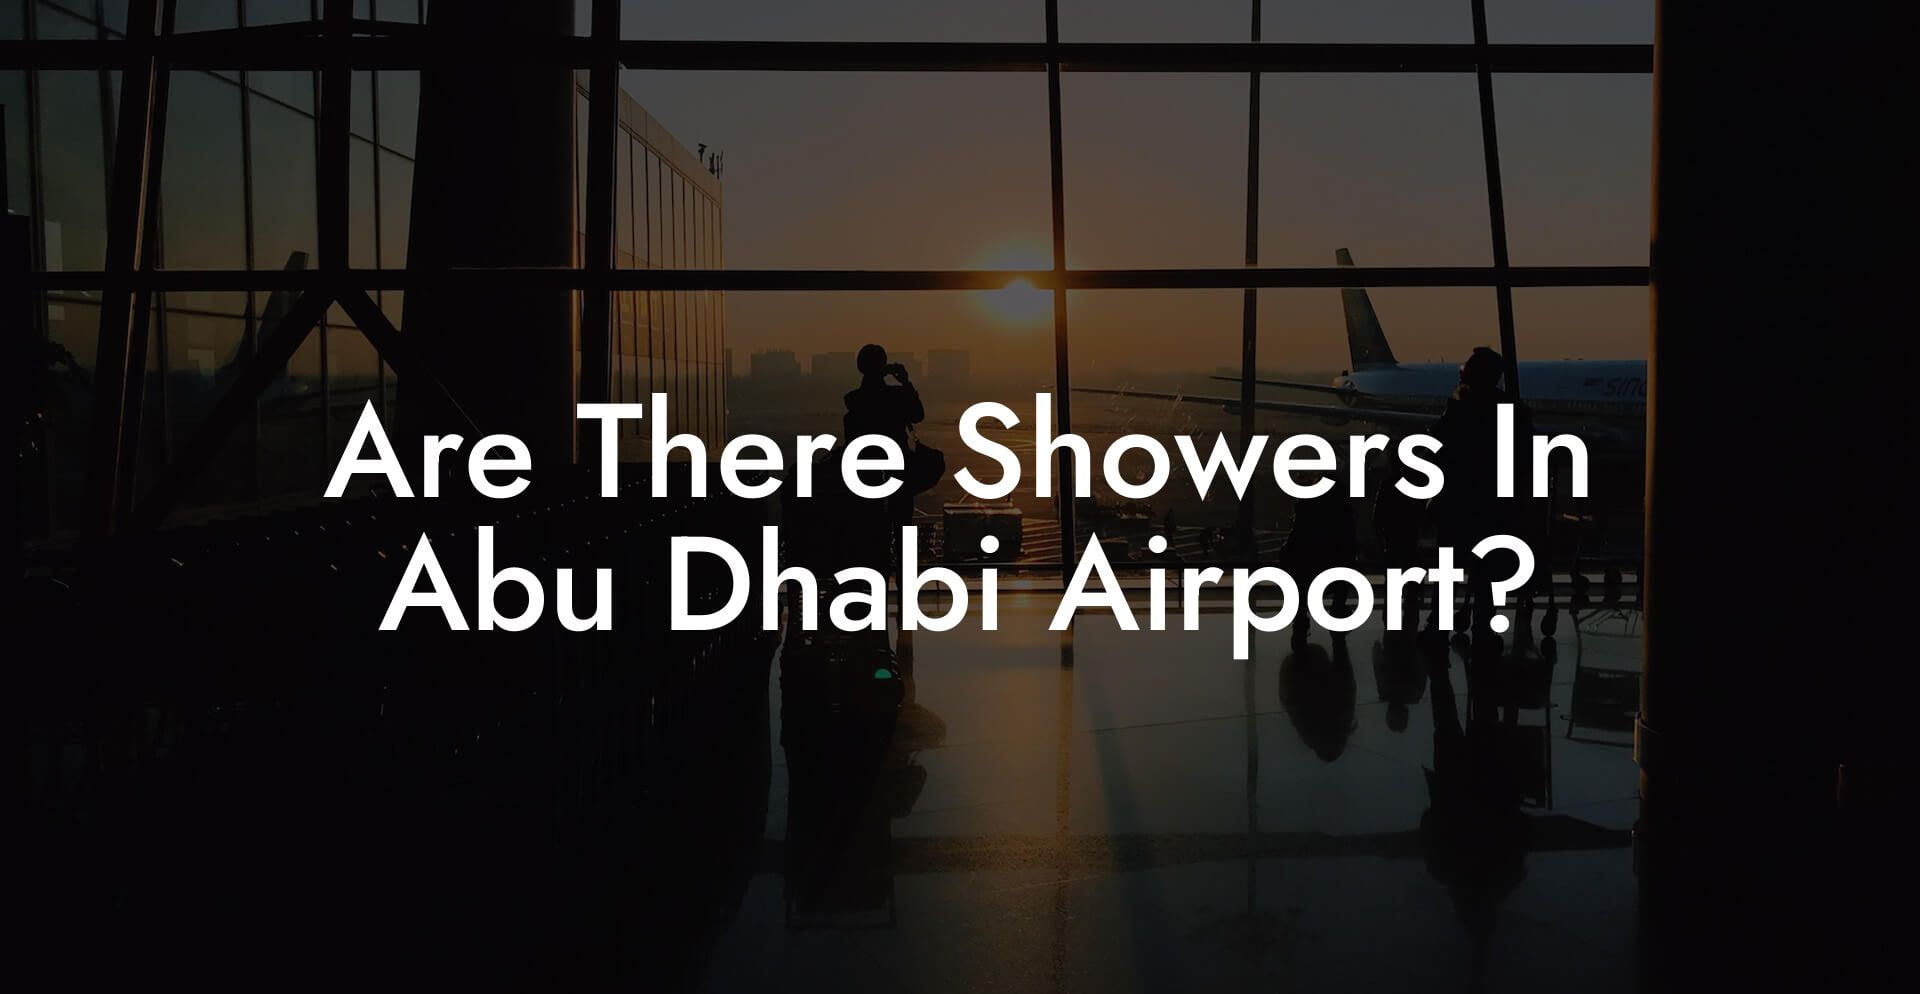 Are There Showers In Abu Dhabi Airport?